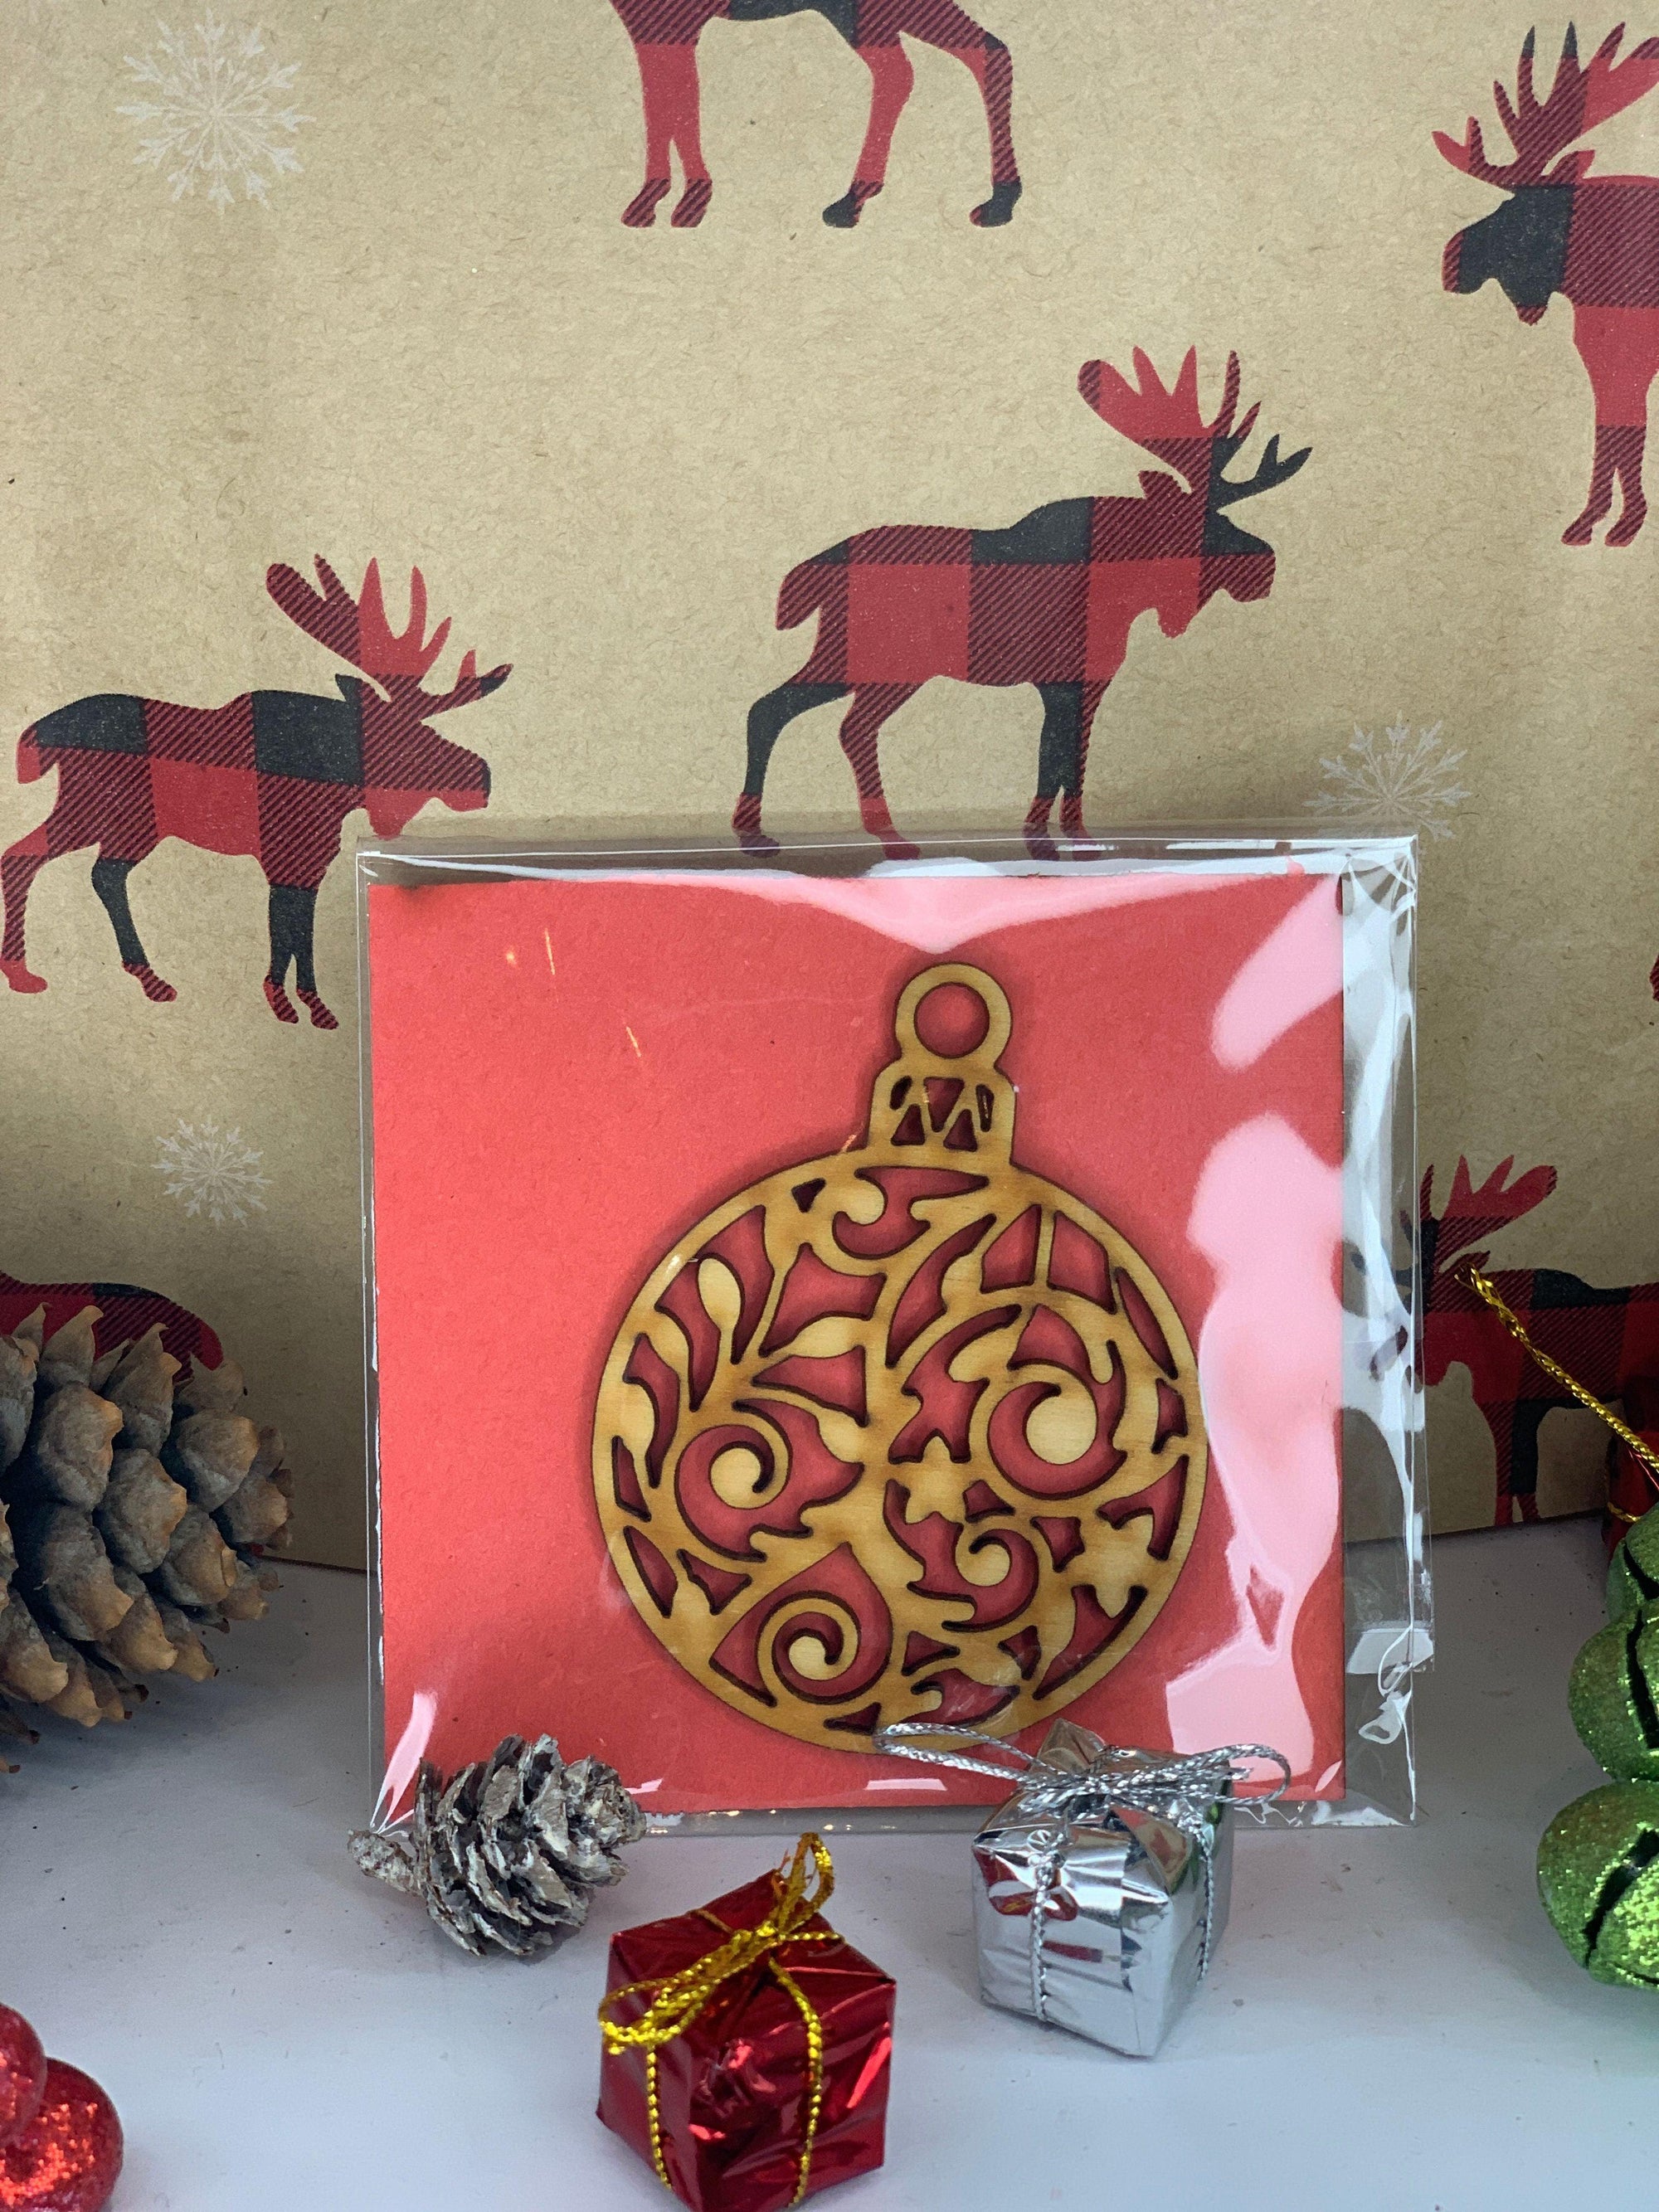 Fancy Christmas Ornament - Northern Heart Designs